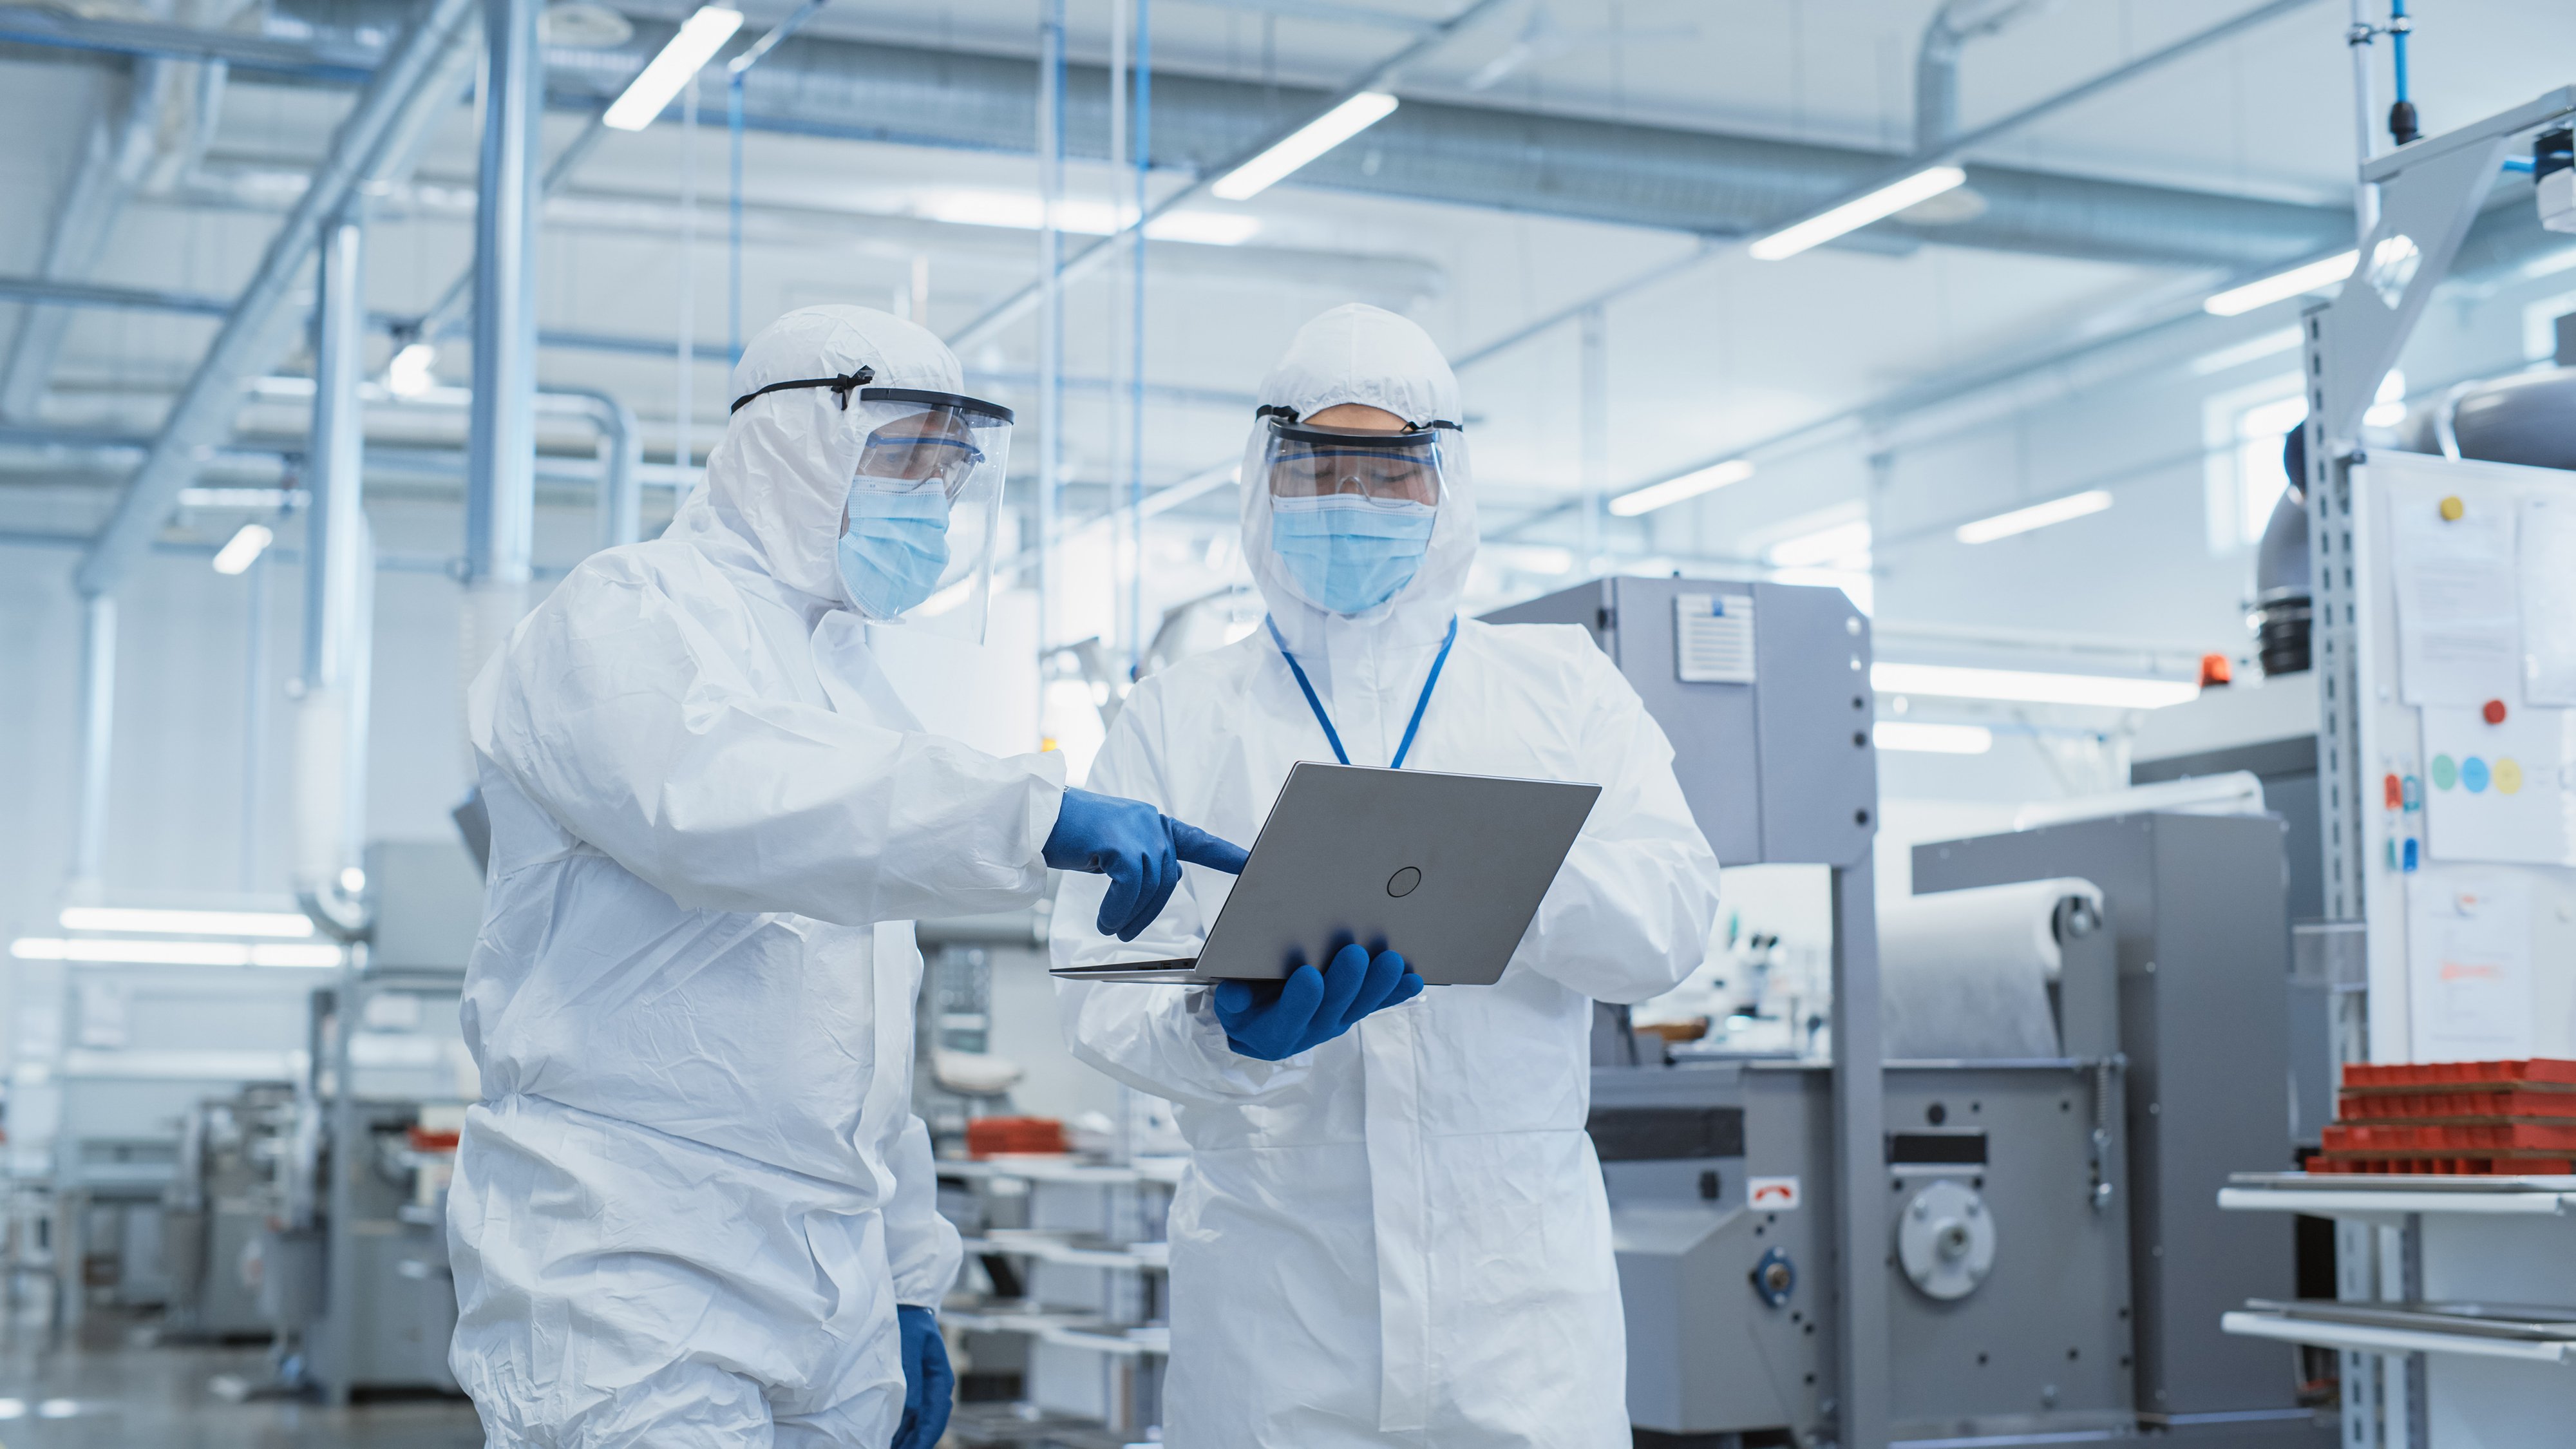 Two Scientists Walking in a Heavy Industry Factory in Sterile Coveralls and Face Masks, Examining data on laptop